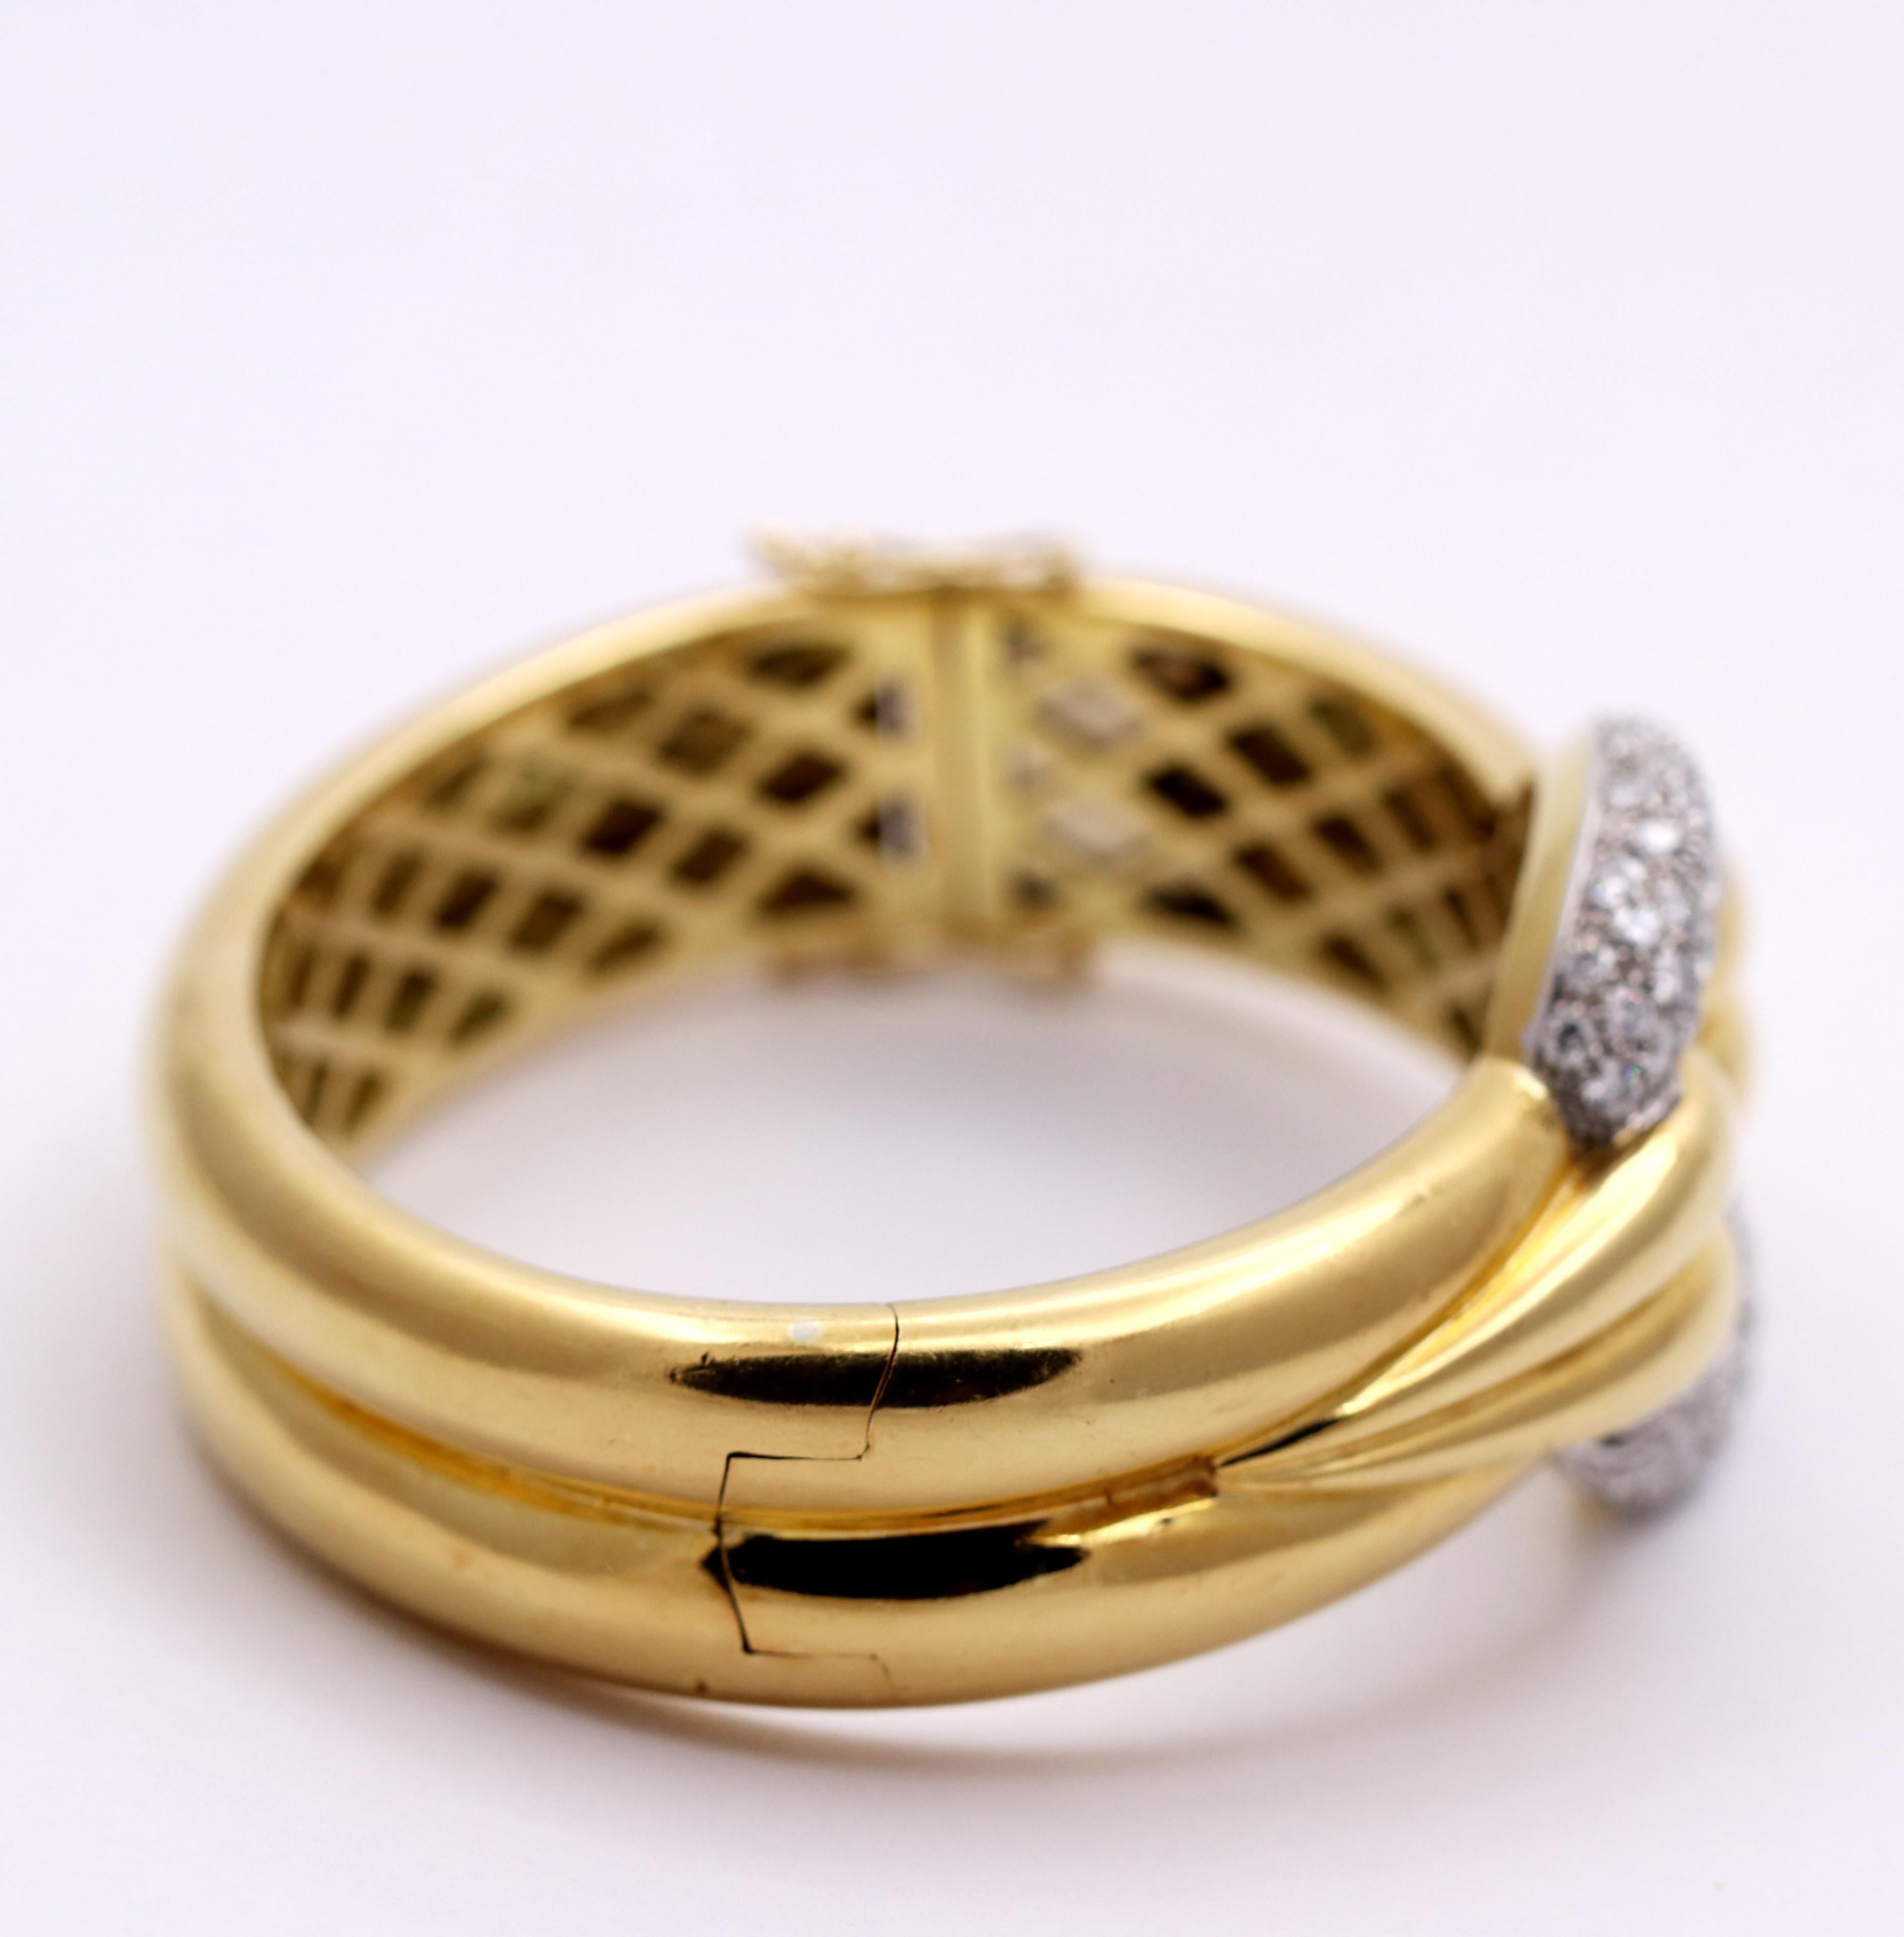 Gently Curving Yellow Gold Bracelet with Diamond Pave' Center 1